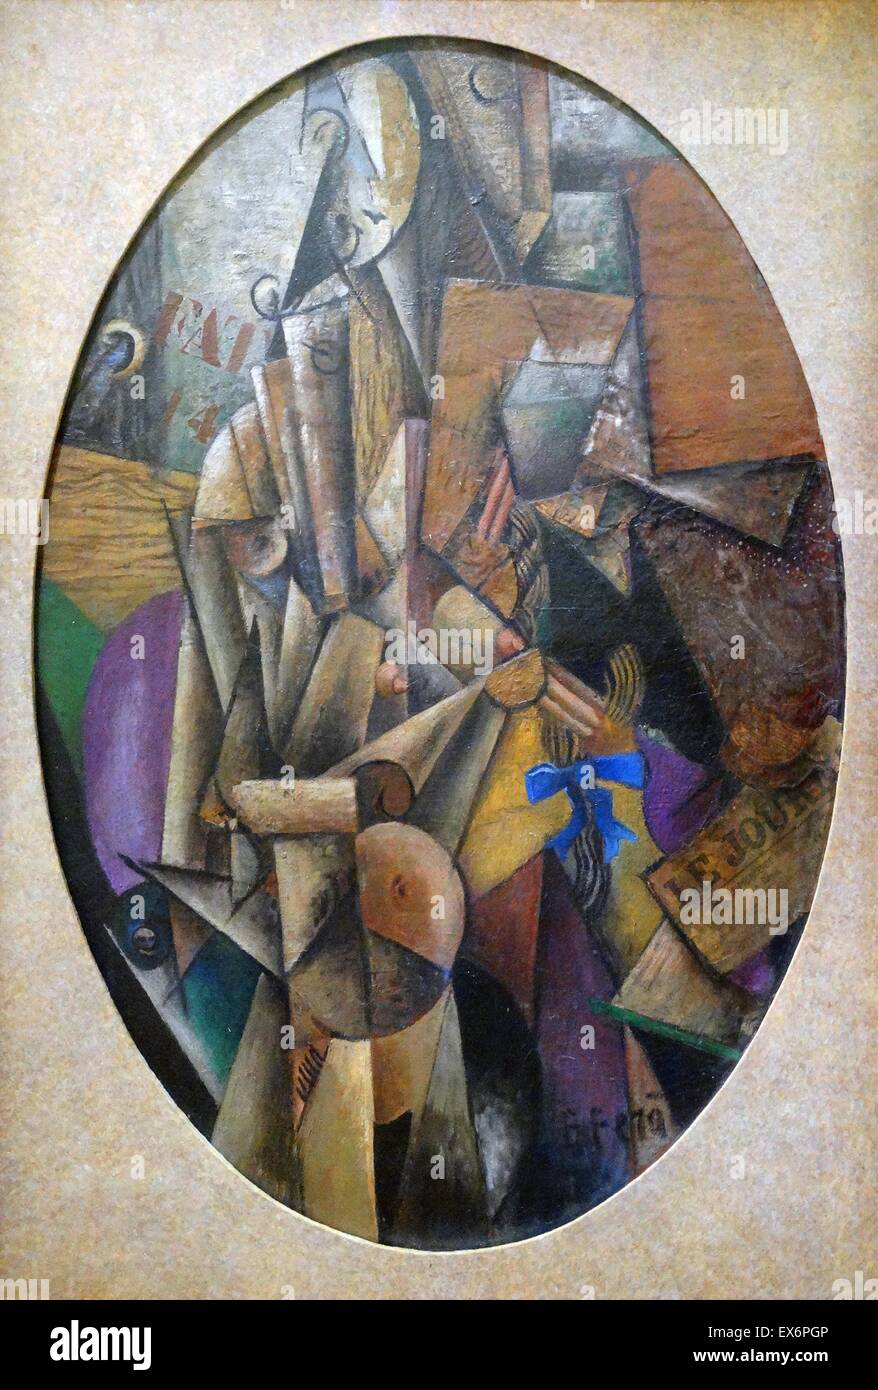 Painting titled 'Sans titre' by Serge Férat (1881-1958) Russian painter and decorator. Dated 1914 Stock Photo